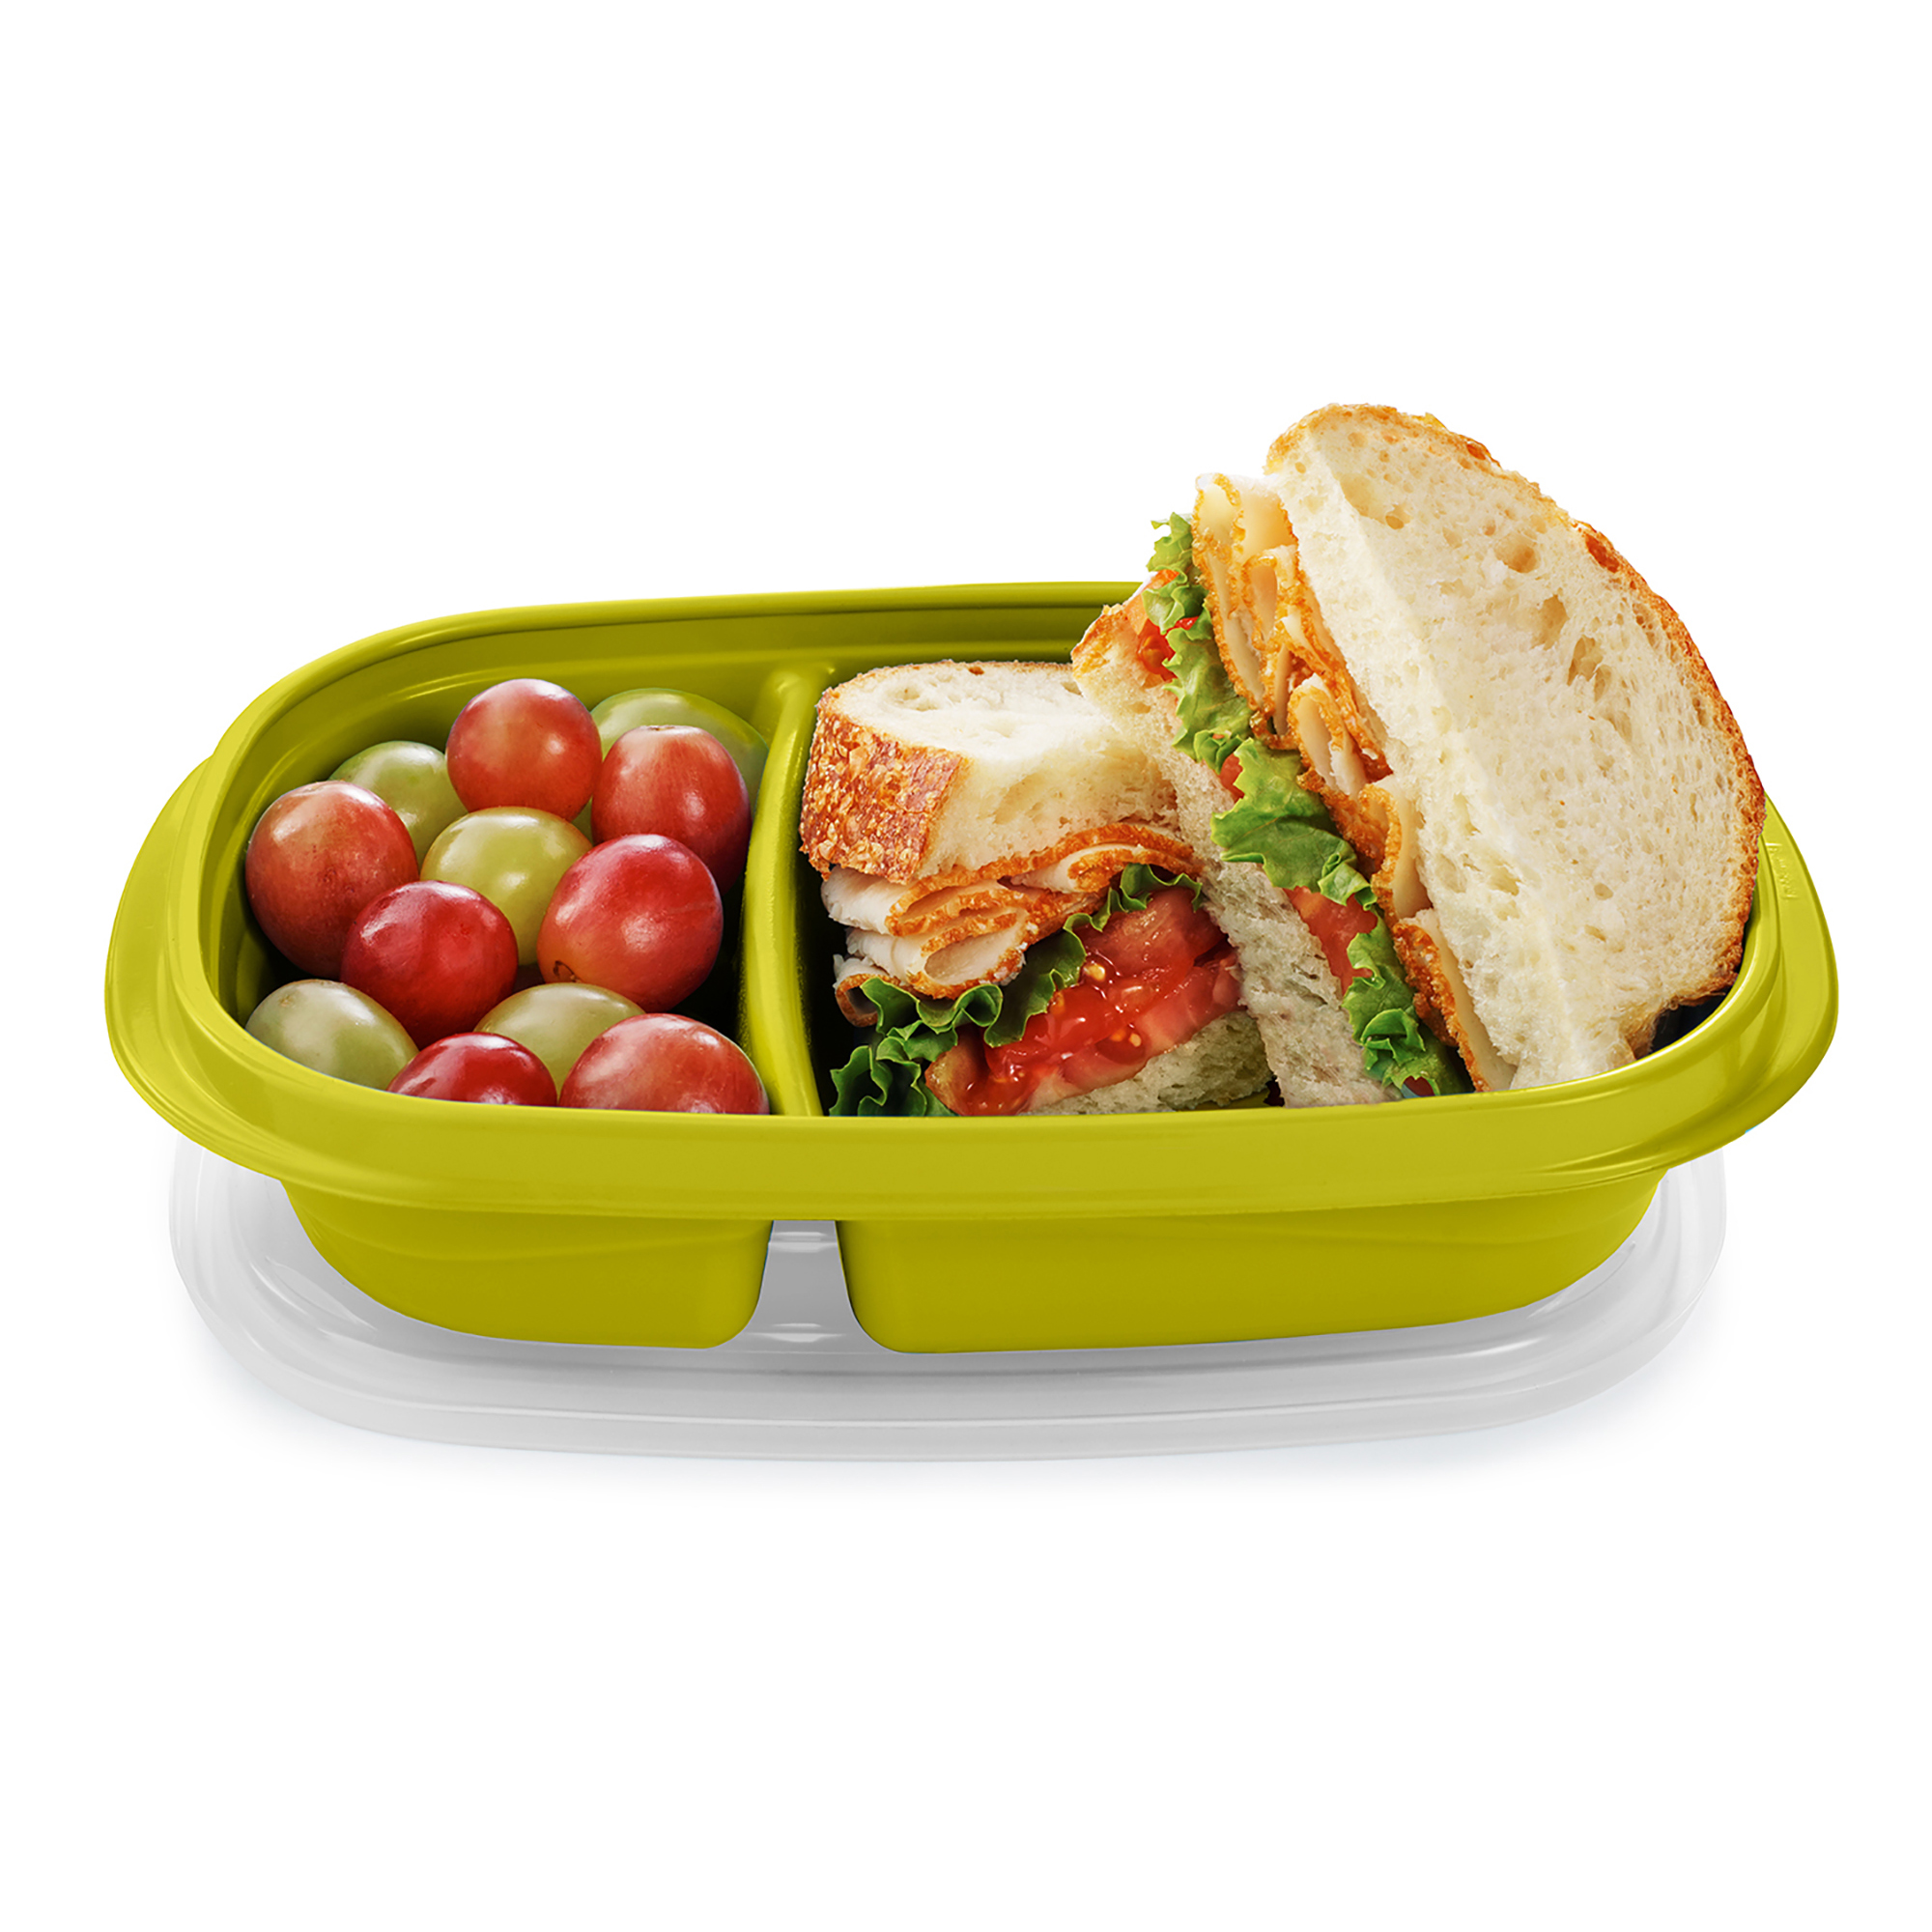 Rubbermaid TakeAlongs 3.7 Cup Divided Food Storage Containers, Set of 3, color may vary - image 3 of 4